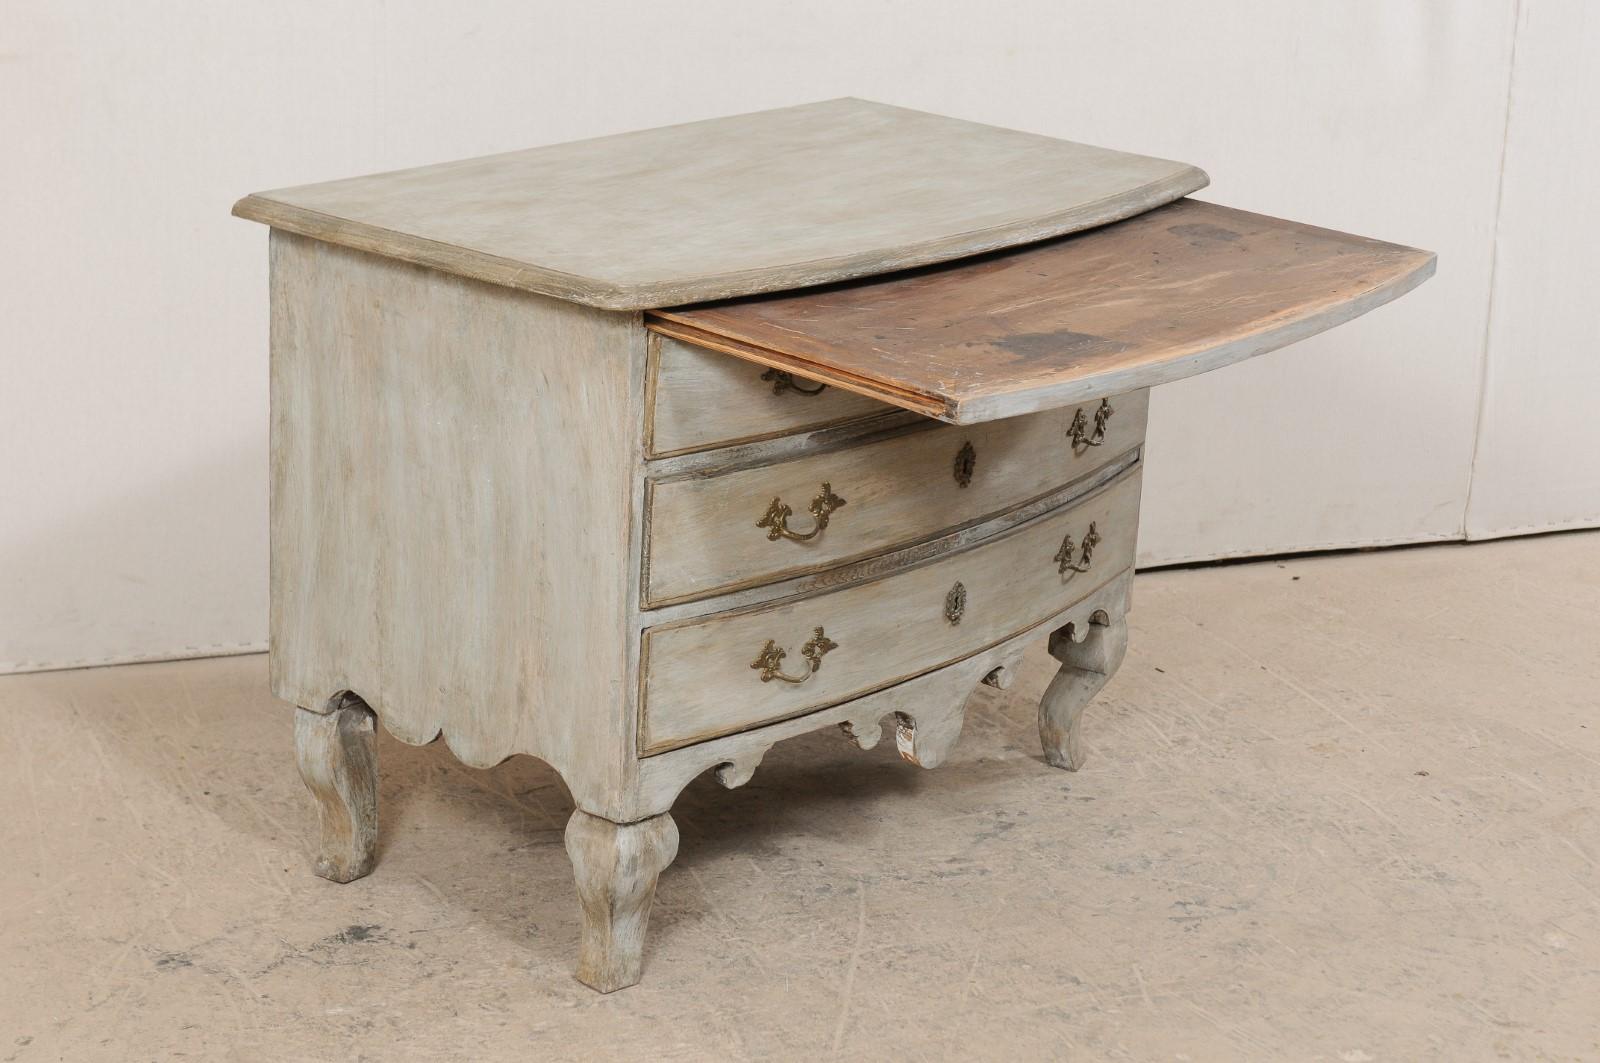 Swedish Period Rococo Bow-Front Painted Wood Chest, Mid-18th Century 3